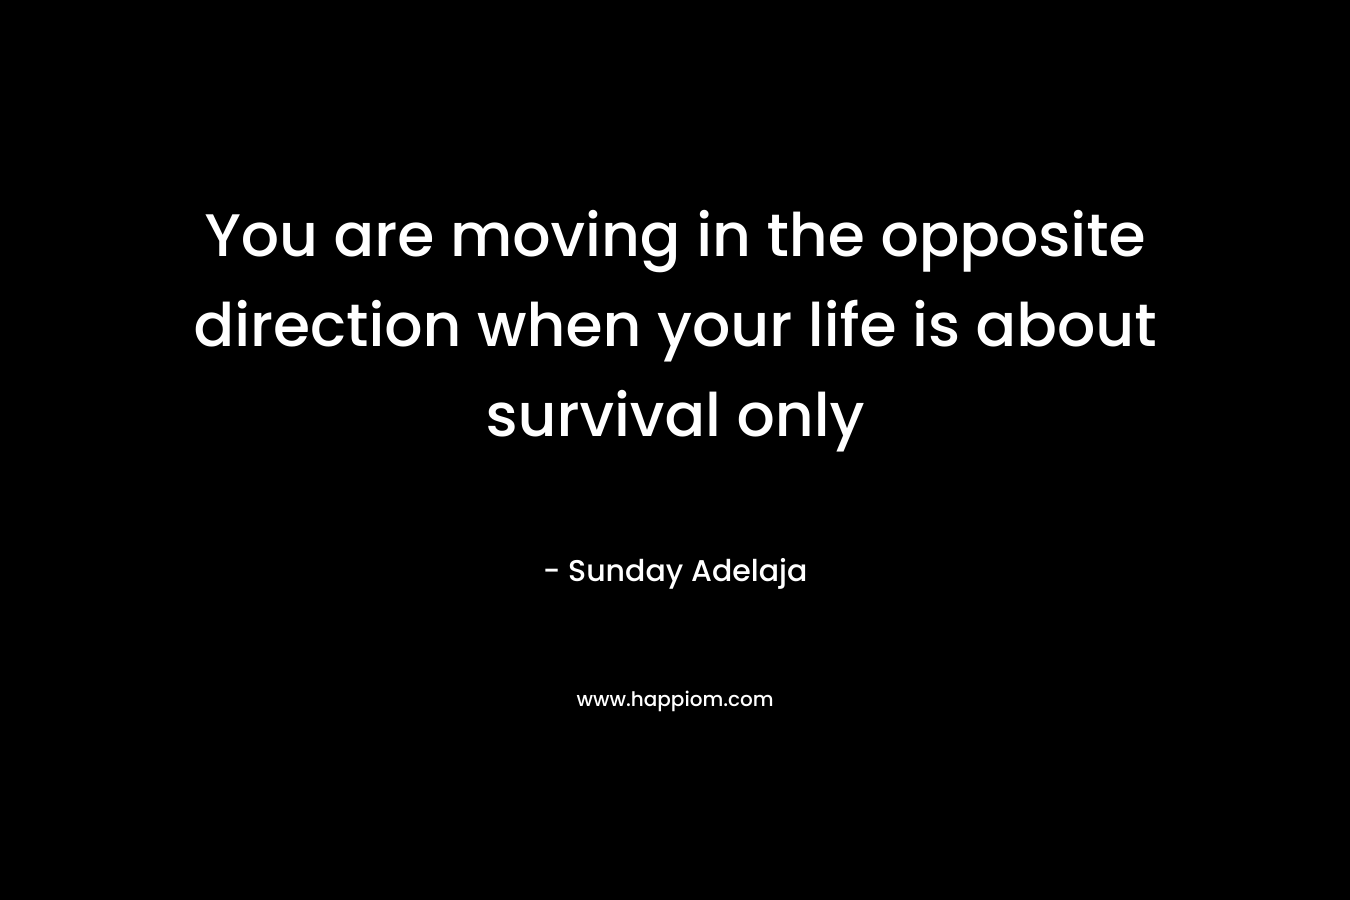 You are moving in the opposite direction when your life is about survival only